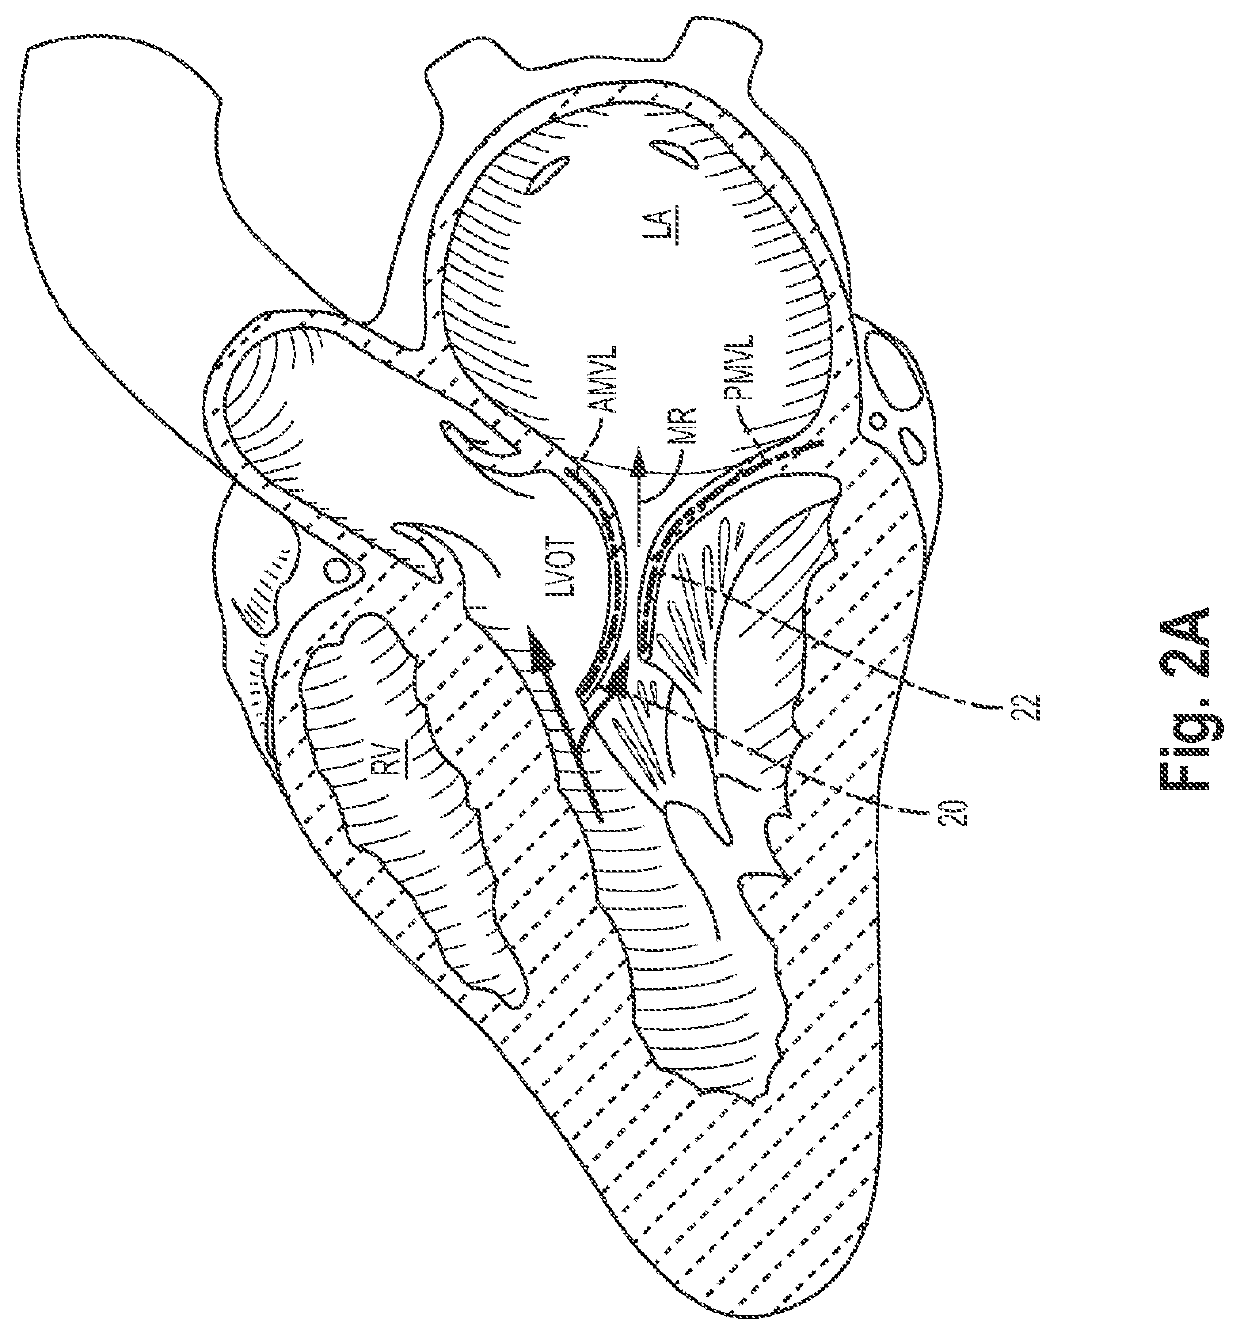 Valve repair devices for repairing a native valve of a patient